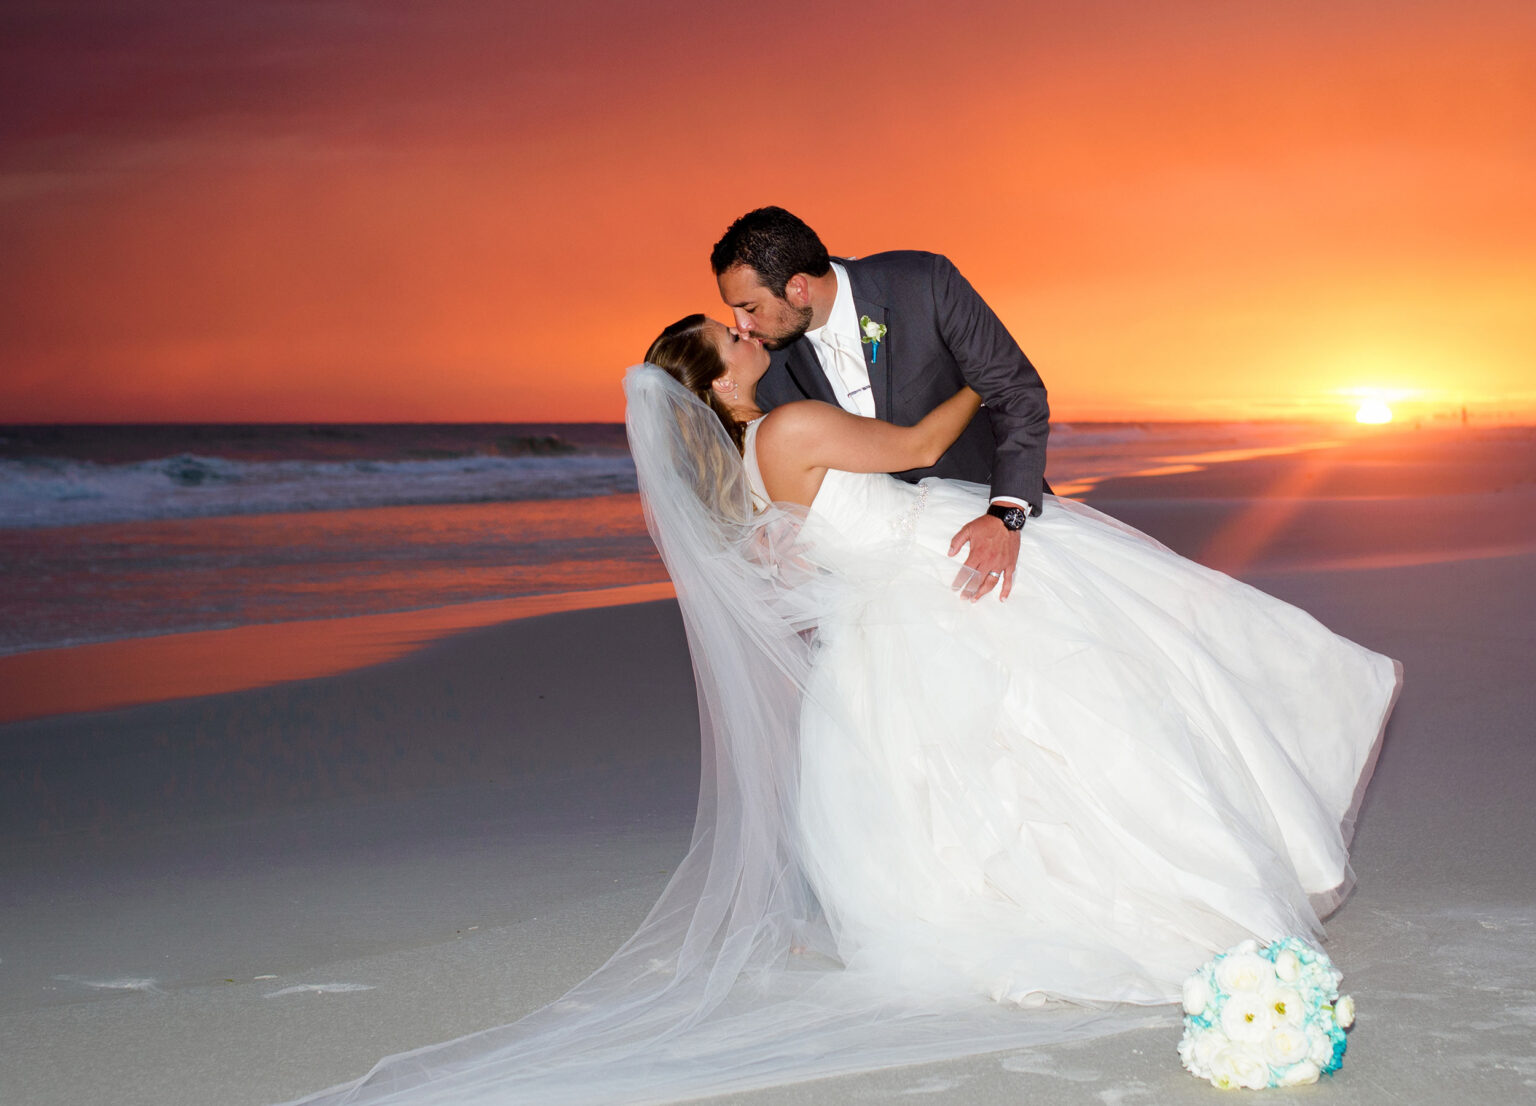 Bride and groom kissing in front of stunning beach sunset